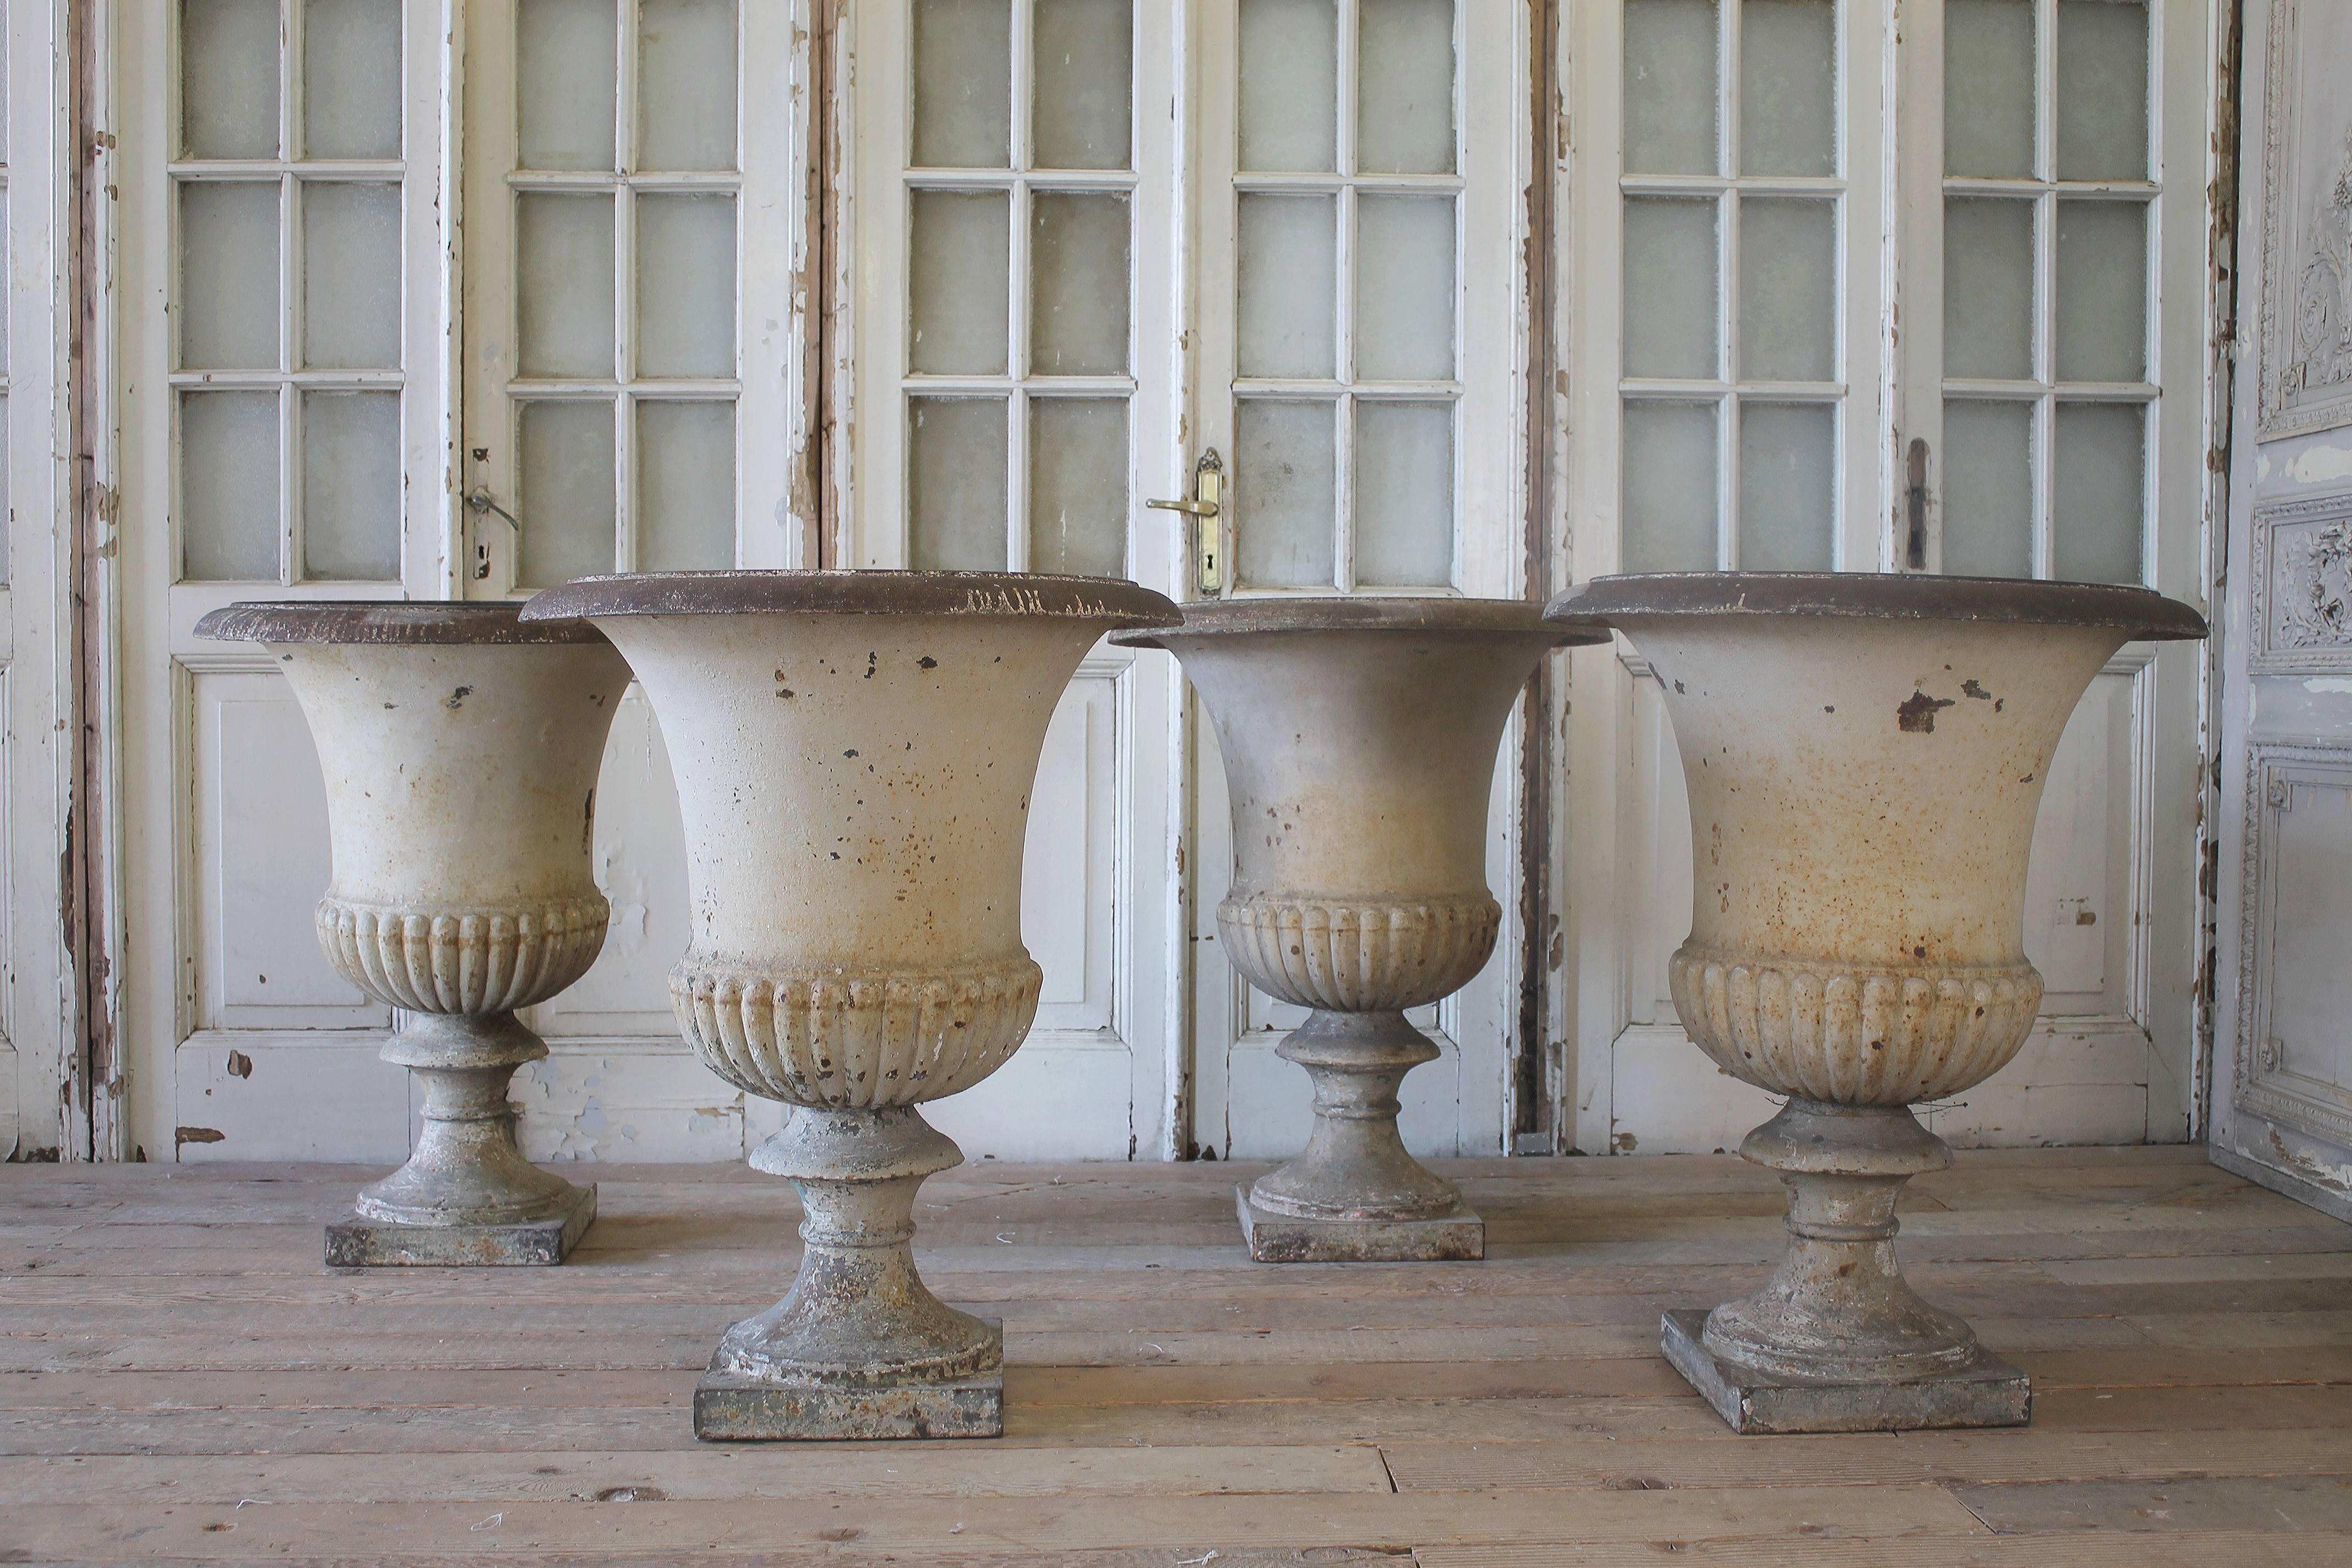 Four fabulous French urns with original painted finish. The coloring is a soft aged white that has weathered to a creamy, grey taupe finish. Wonderful crackle and aging to urns, and chippy paint here and there. All of the urns are solid and sturdy.